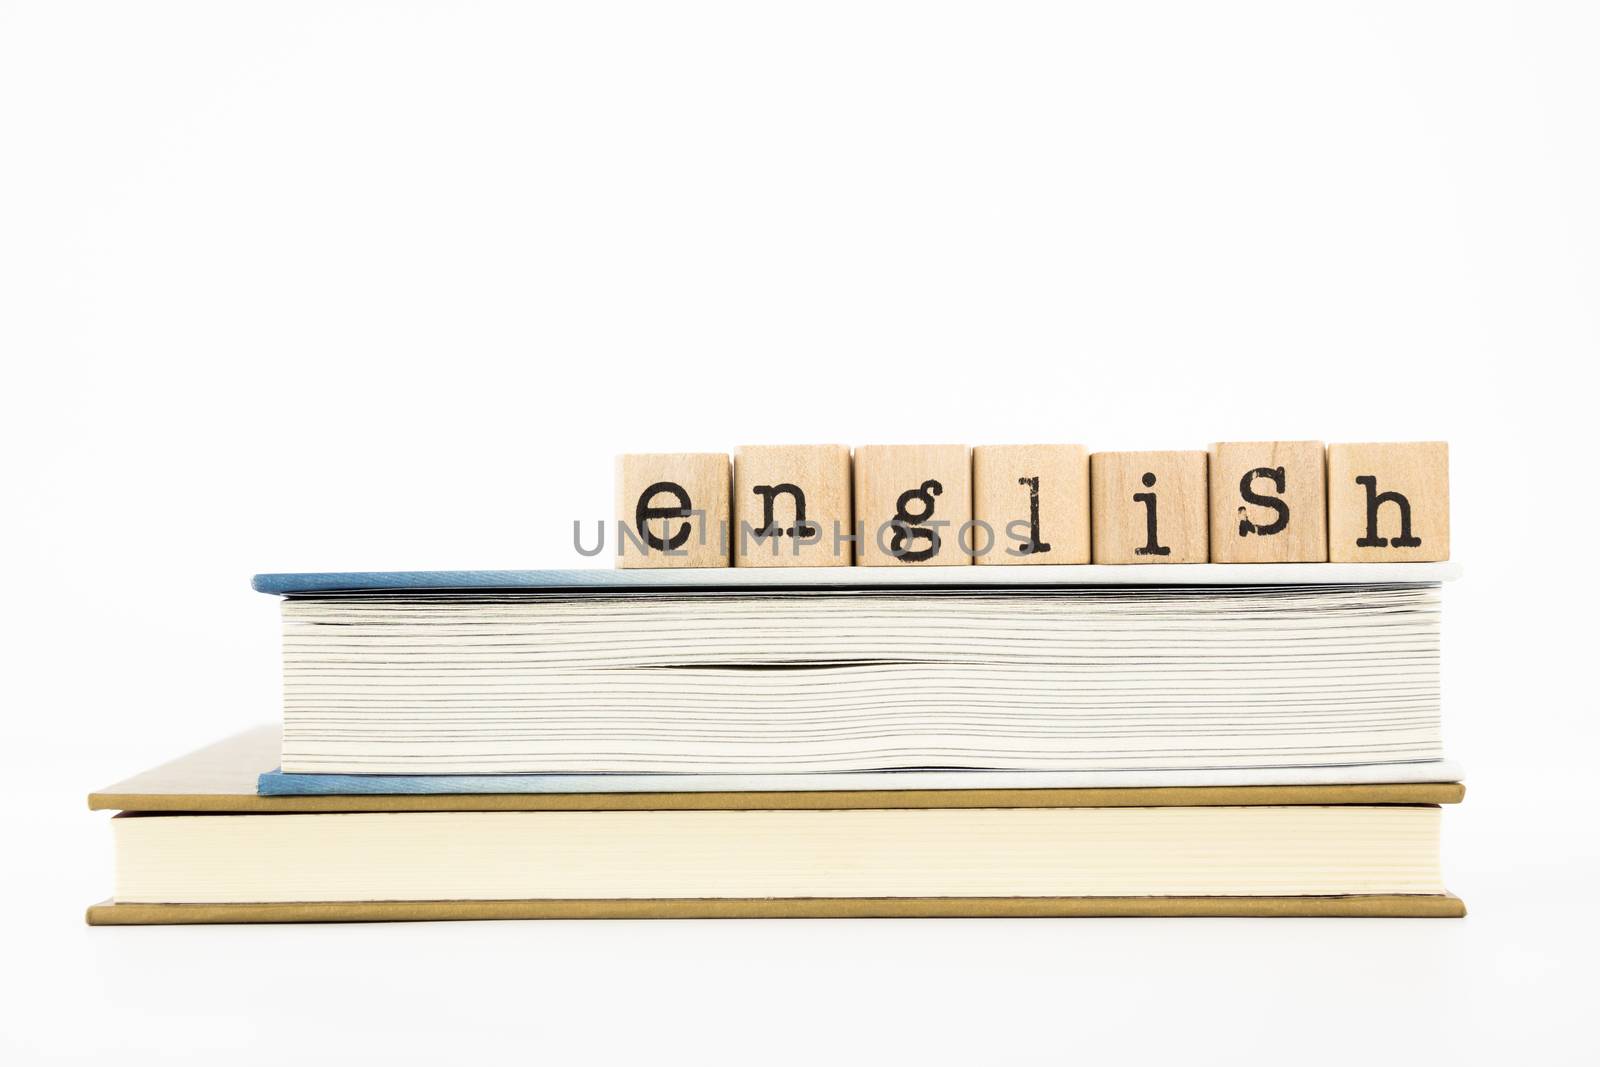 english wording and books   by vinnstock